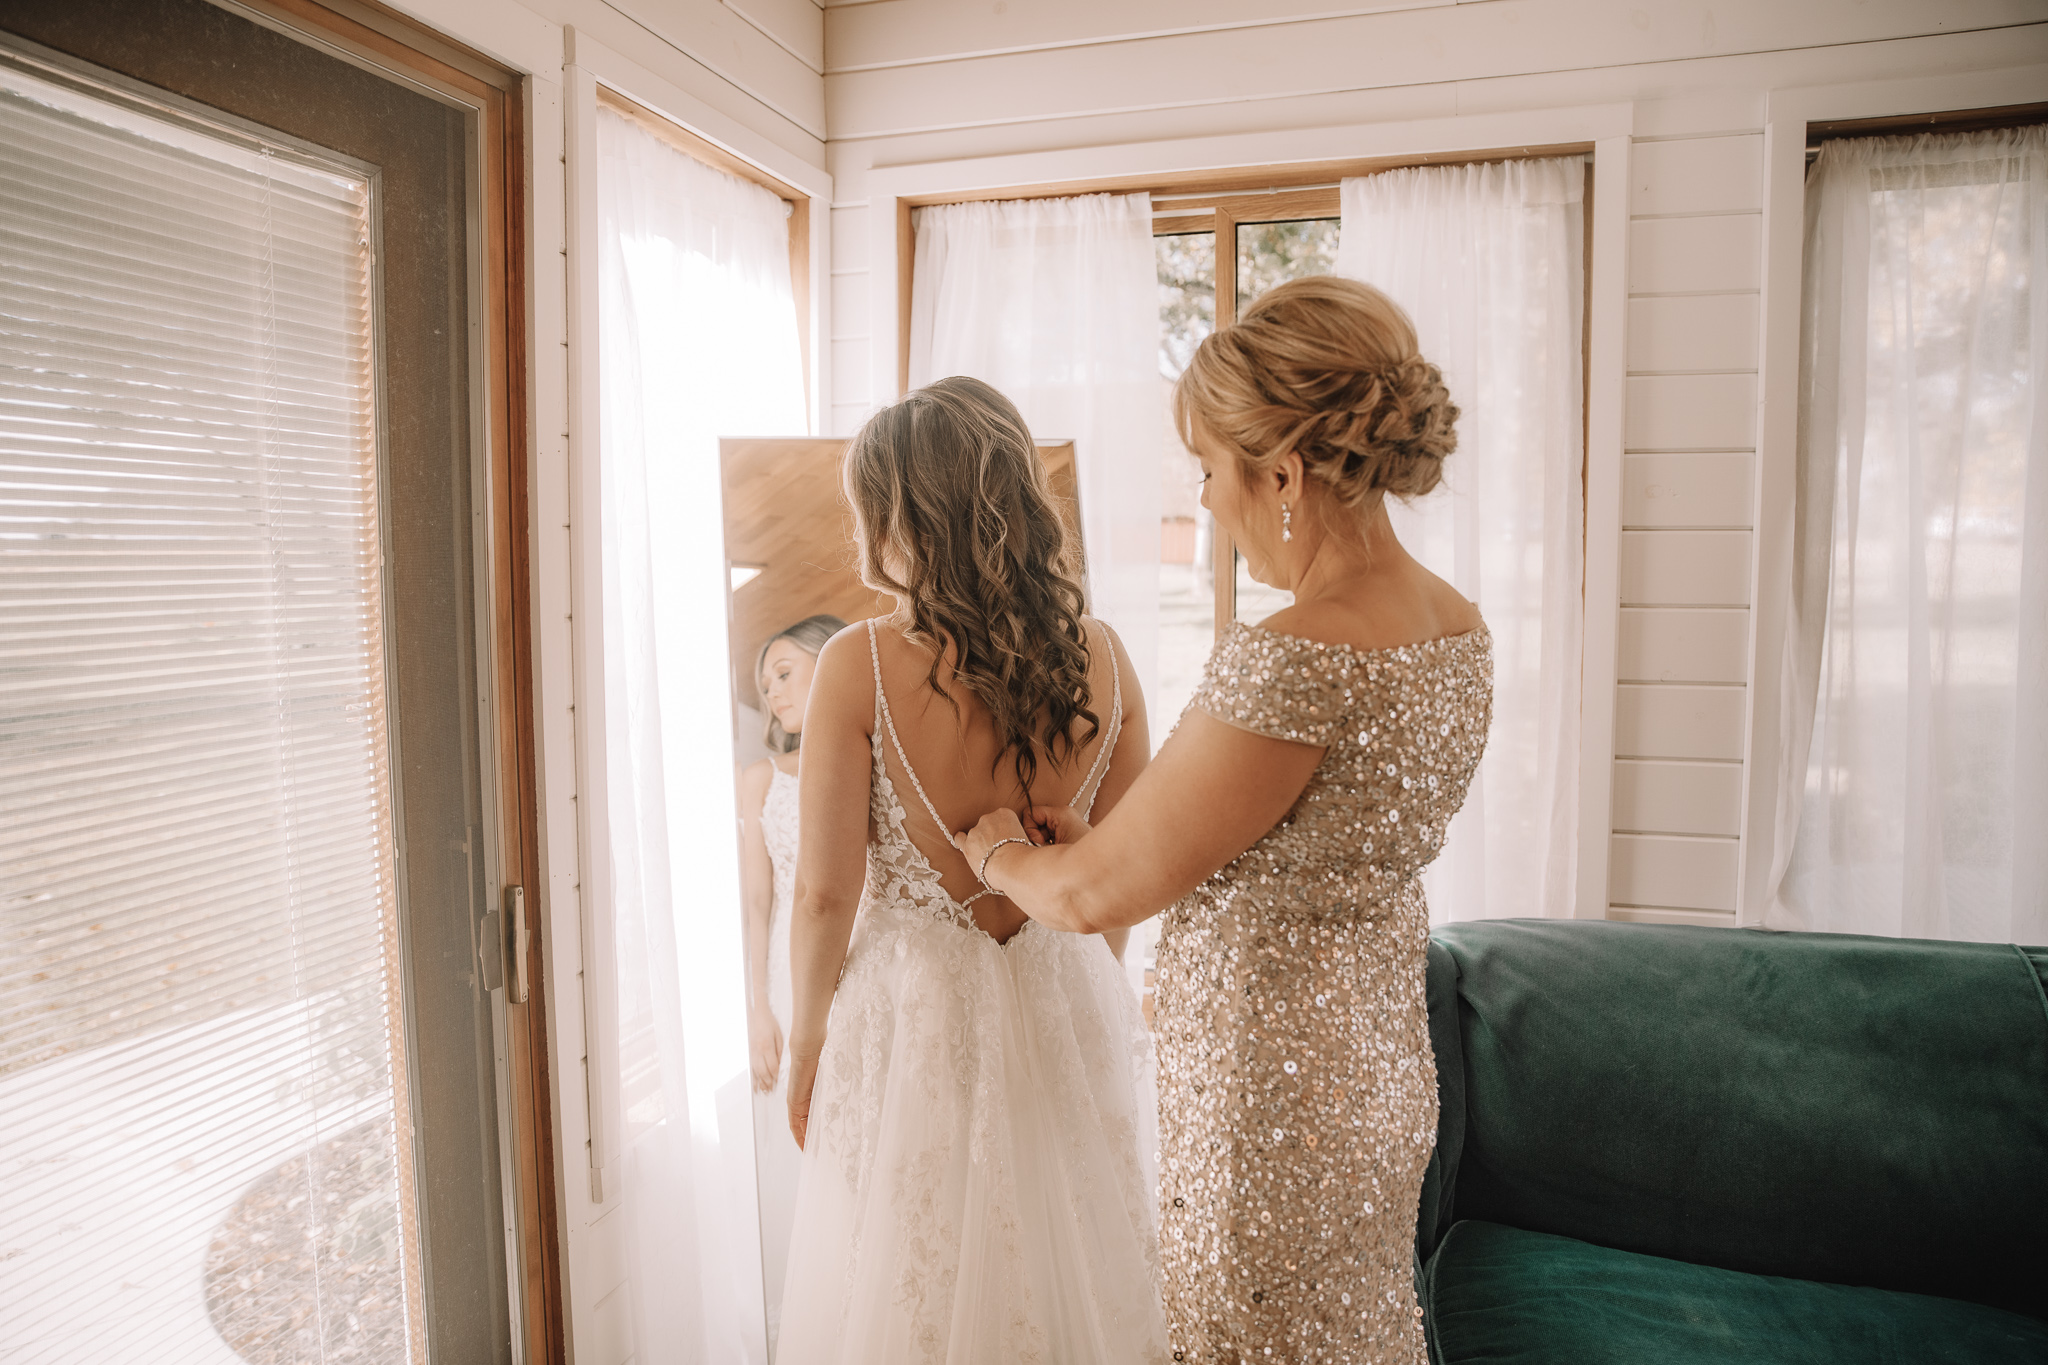 Top getting ready tips for brides from a professional wedding photographer